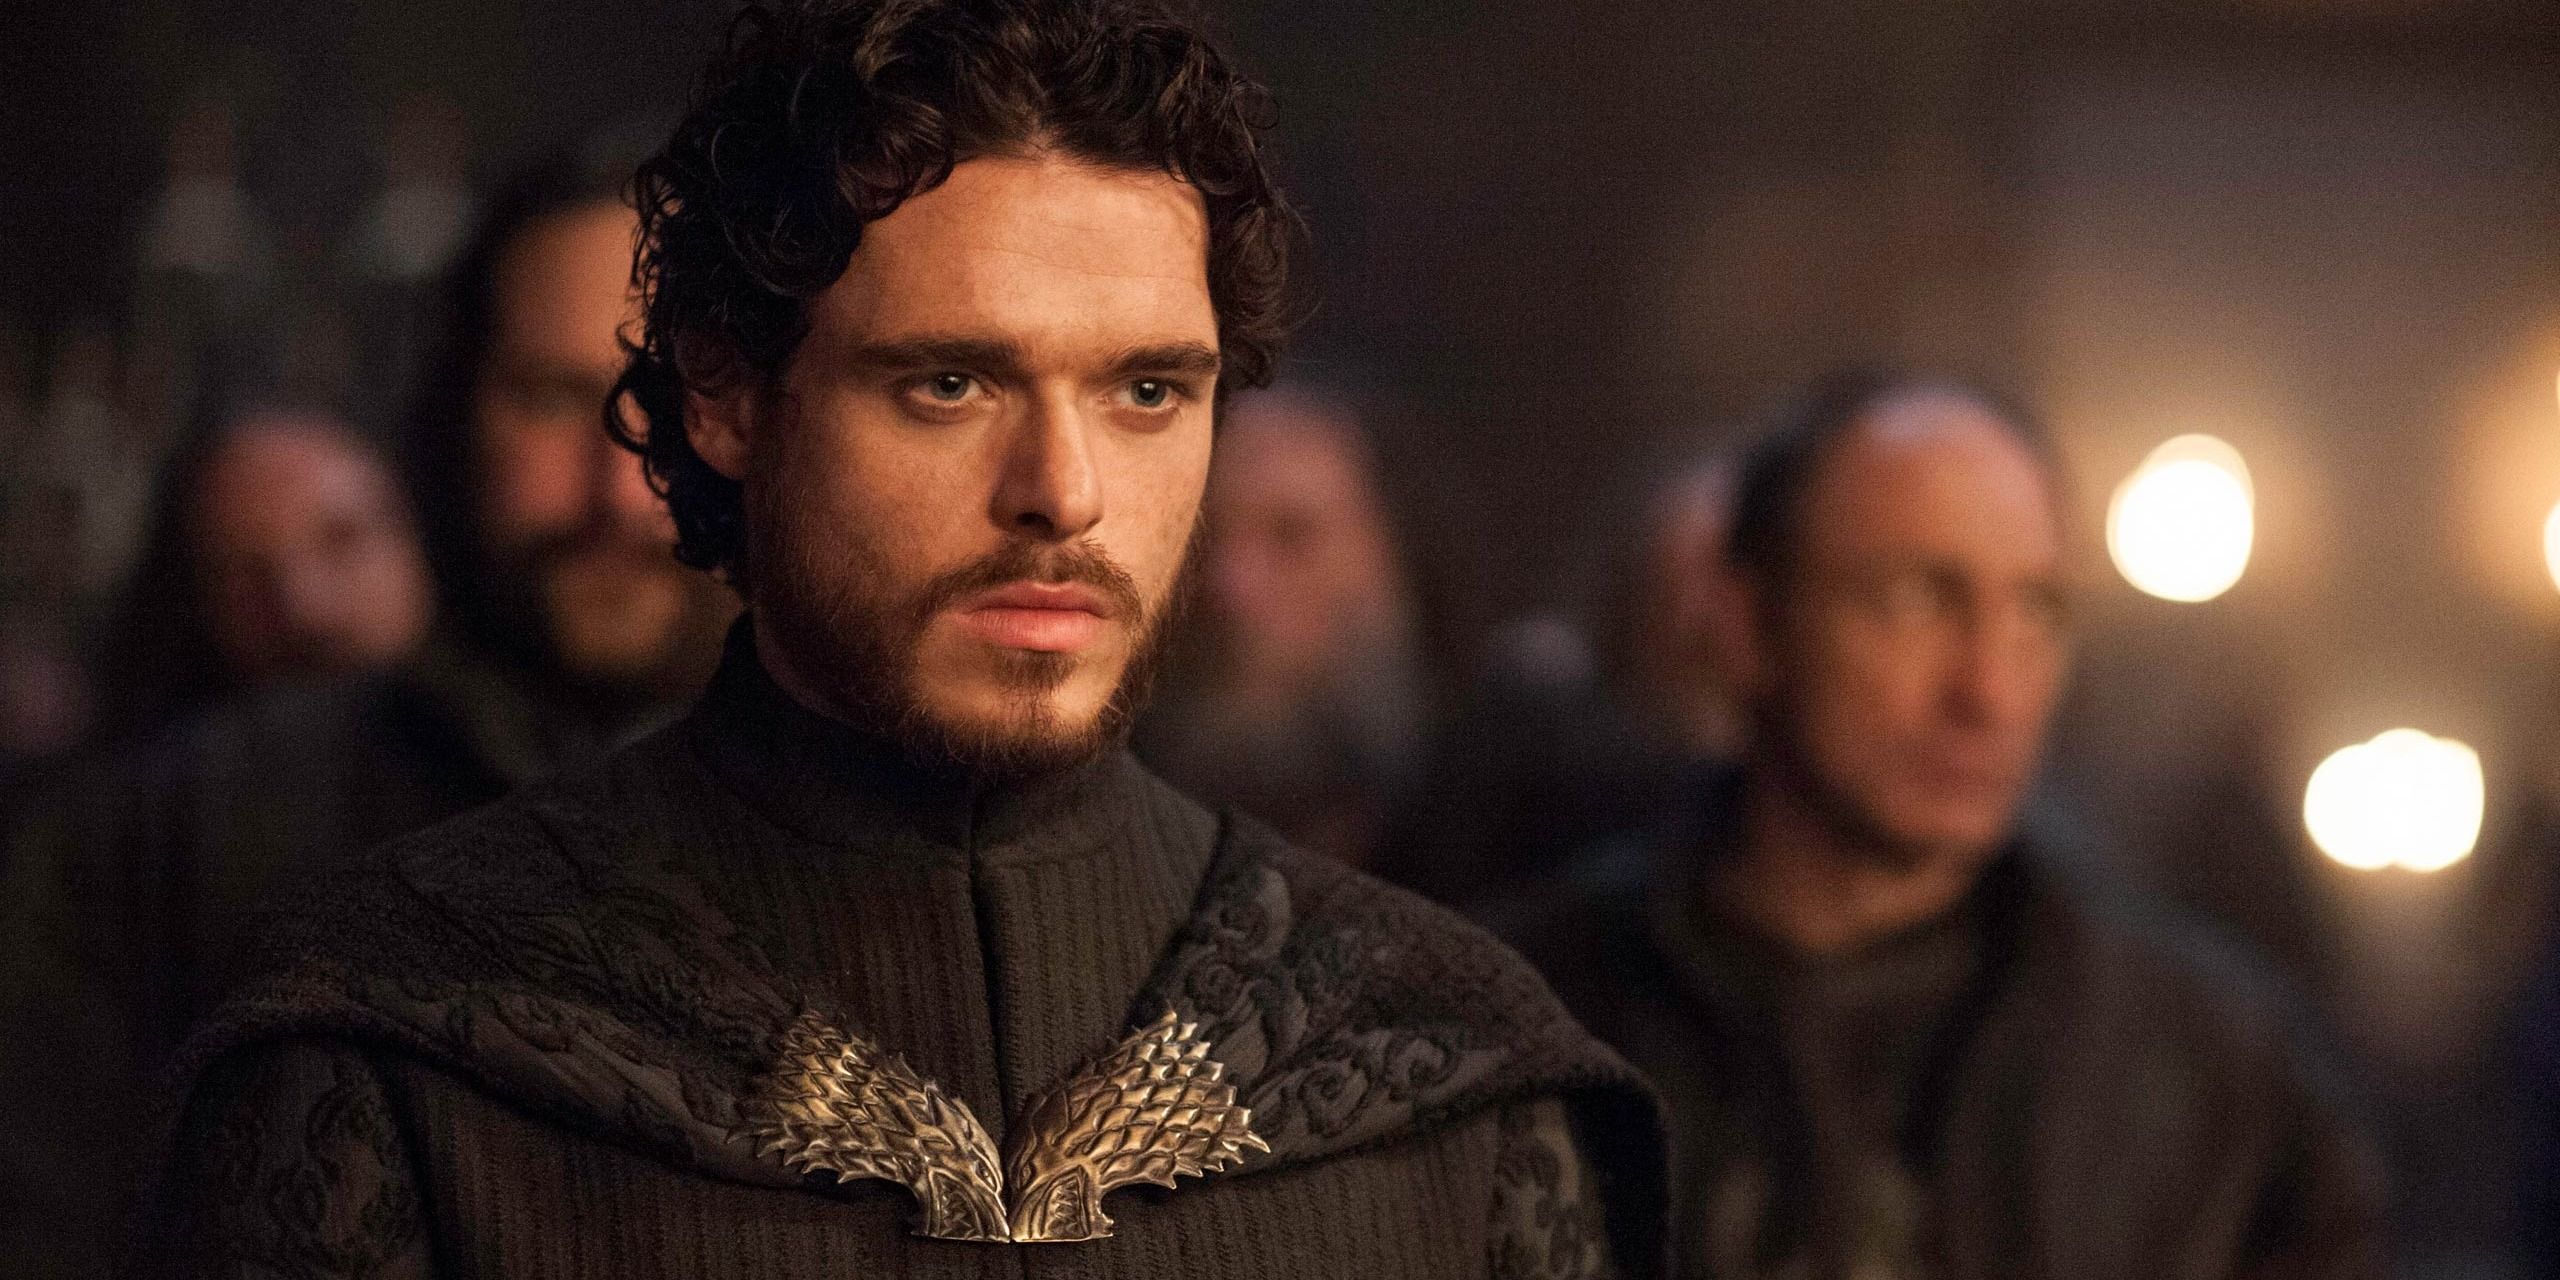 Robb Stark with his bannermen behind him in Game of Thrones.